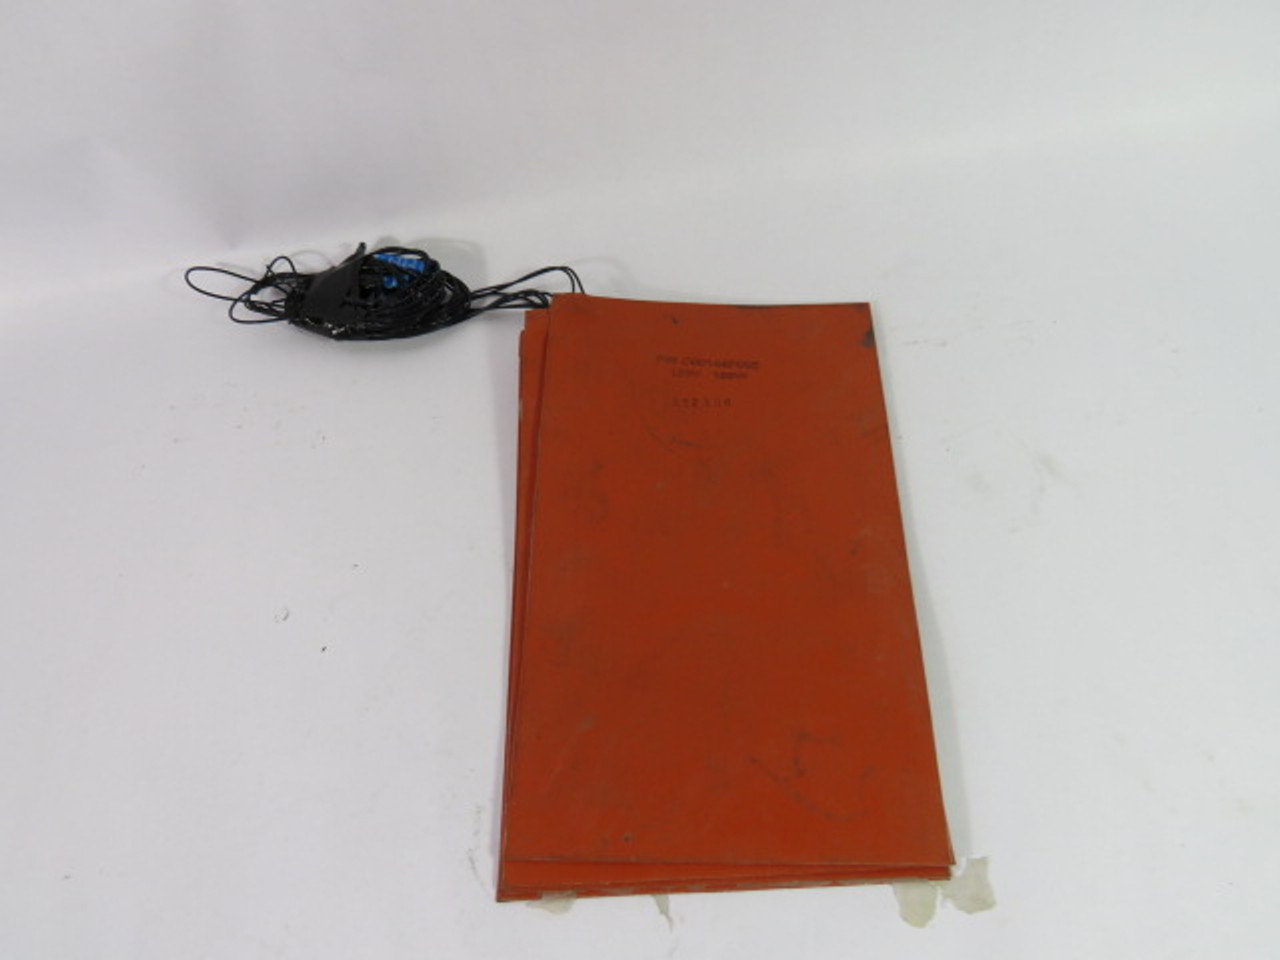 Generic C00144P003 Silicone Rubber Heating Pad 4-PK 120V 150W USED